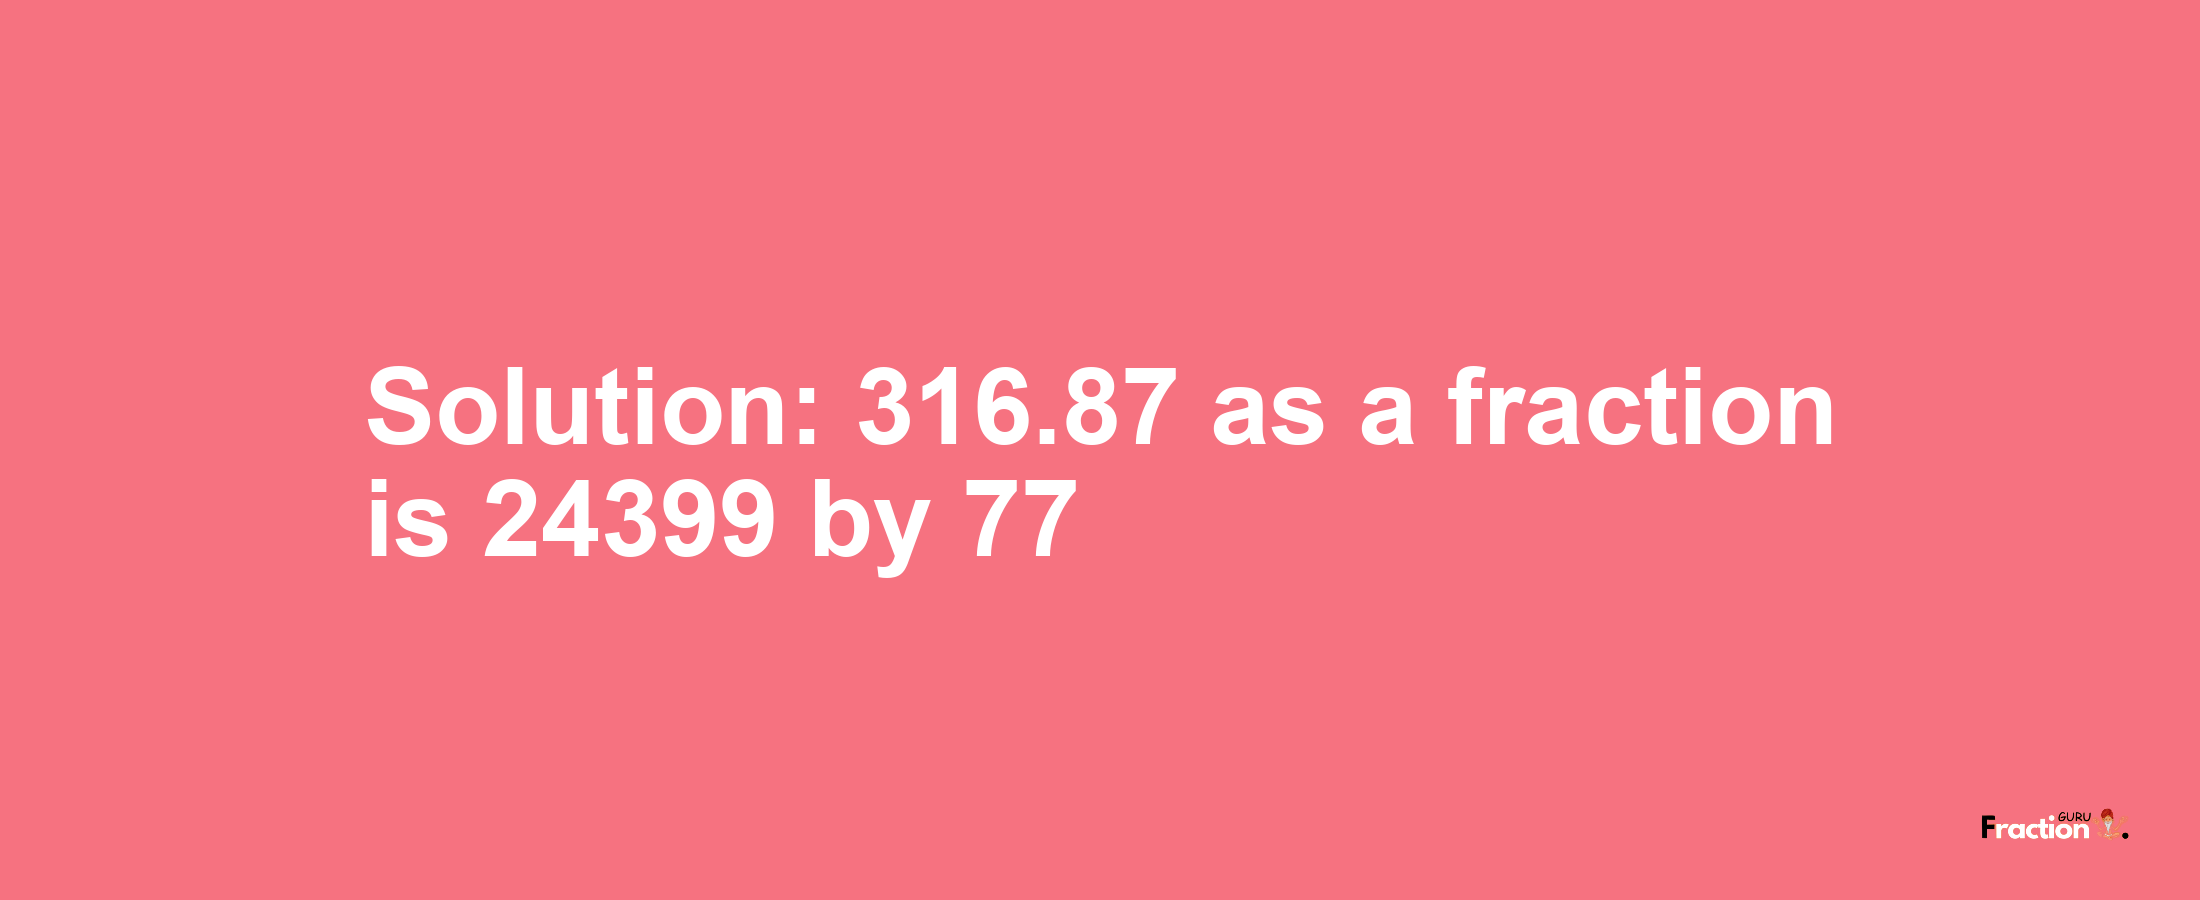 Solution:316.87 as a fraction is 24399/77